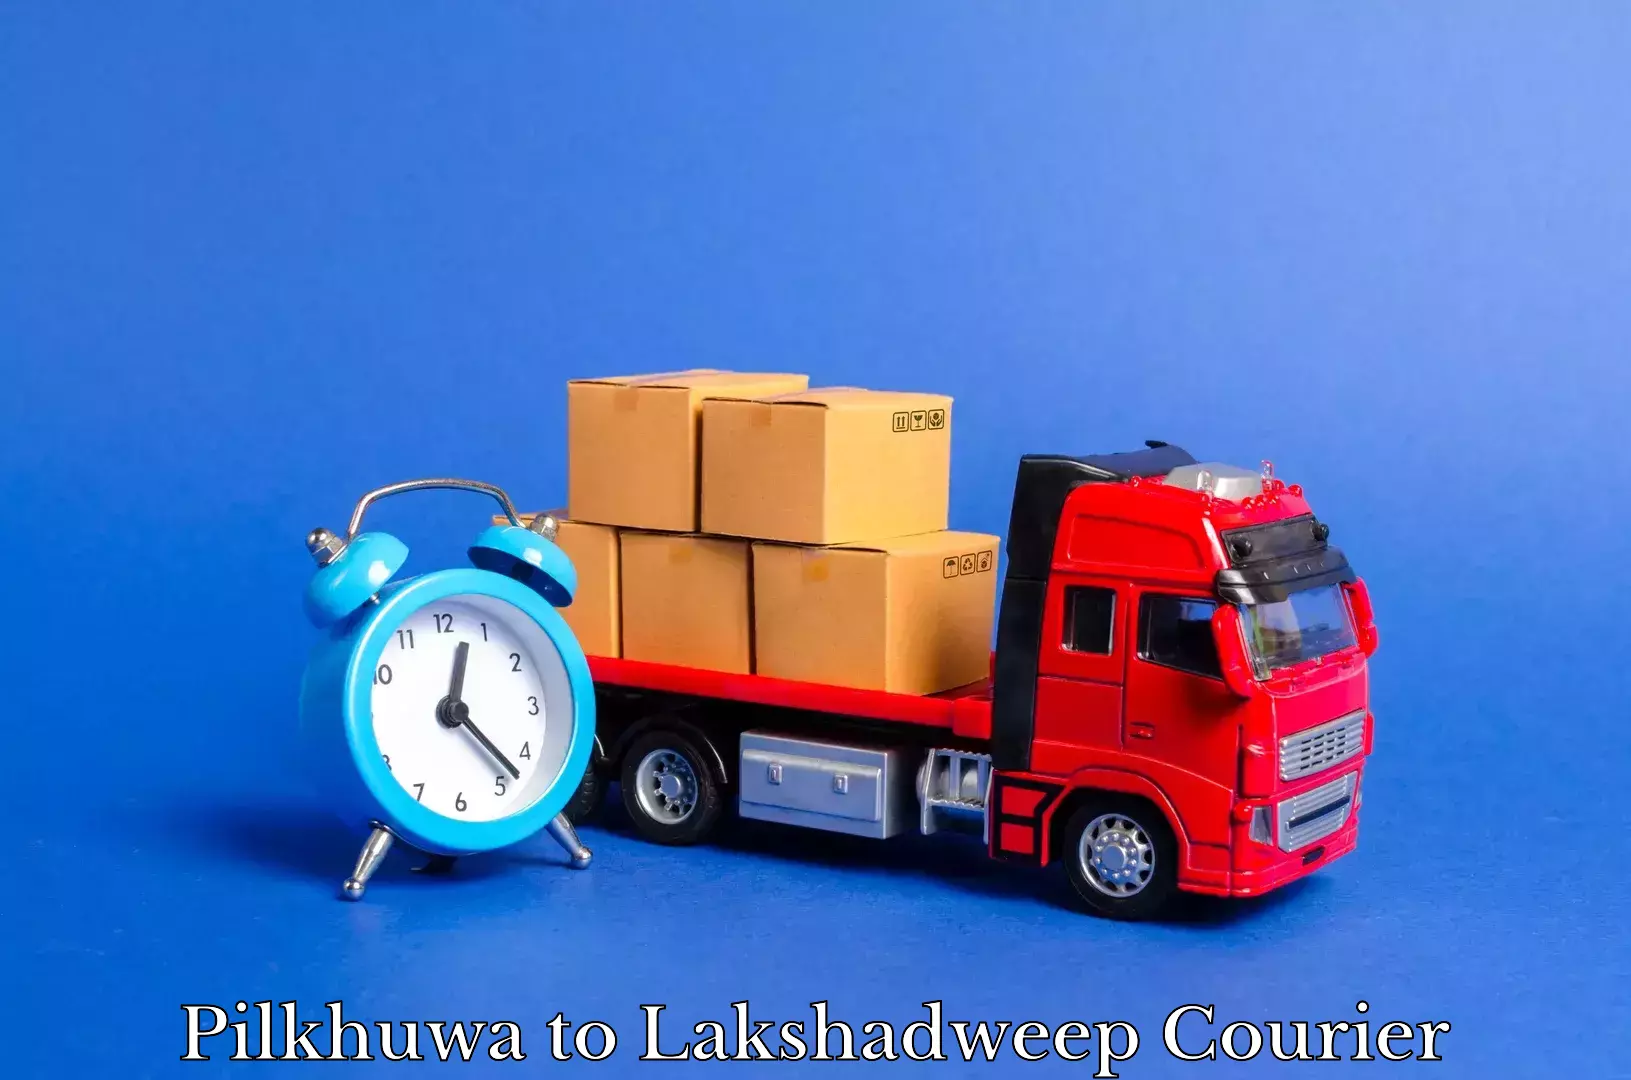 Moving and packing experts in Pilkhuwa to Lakshadweep